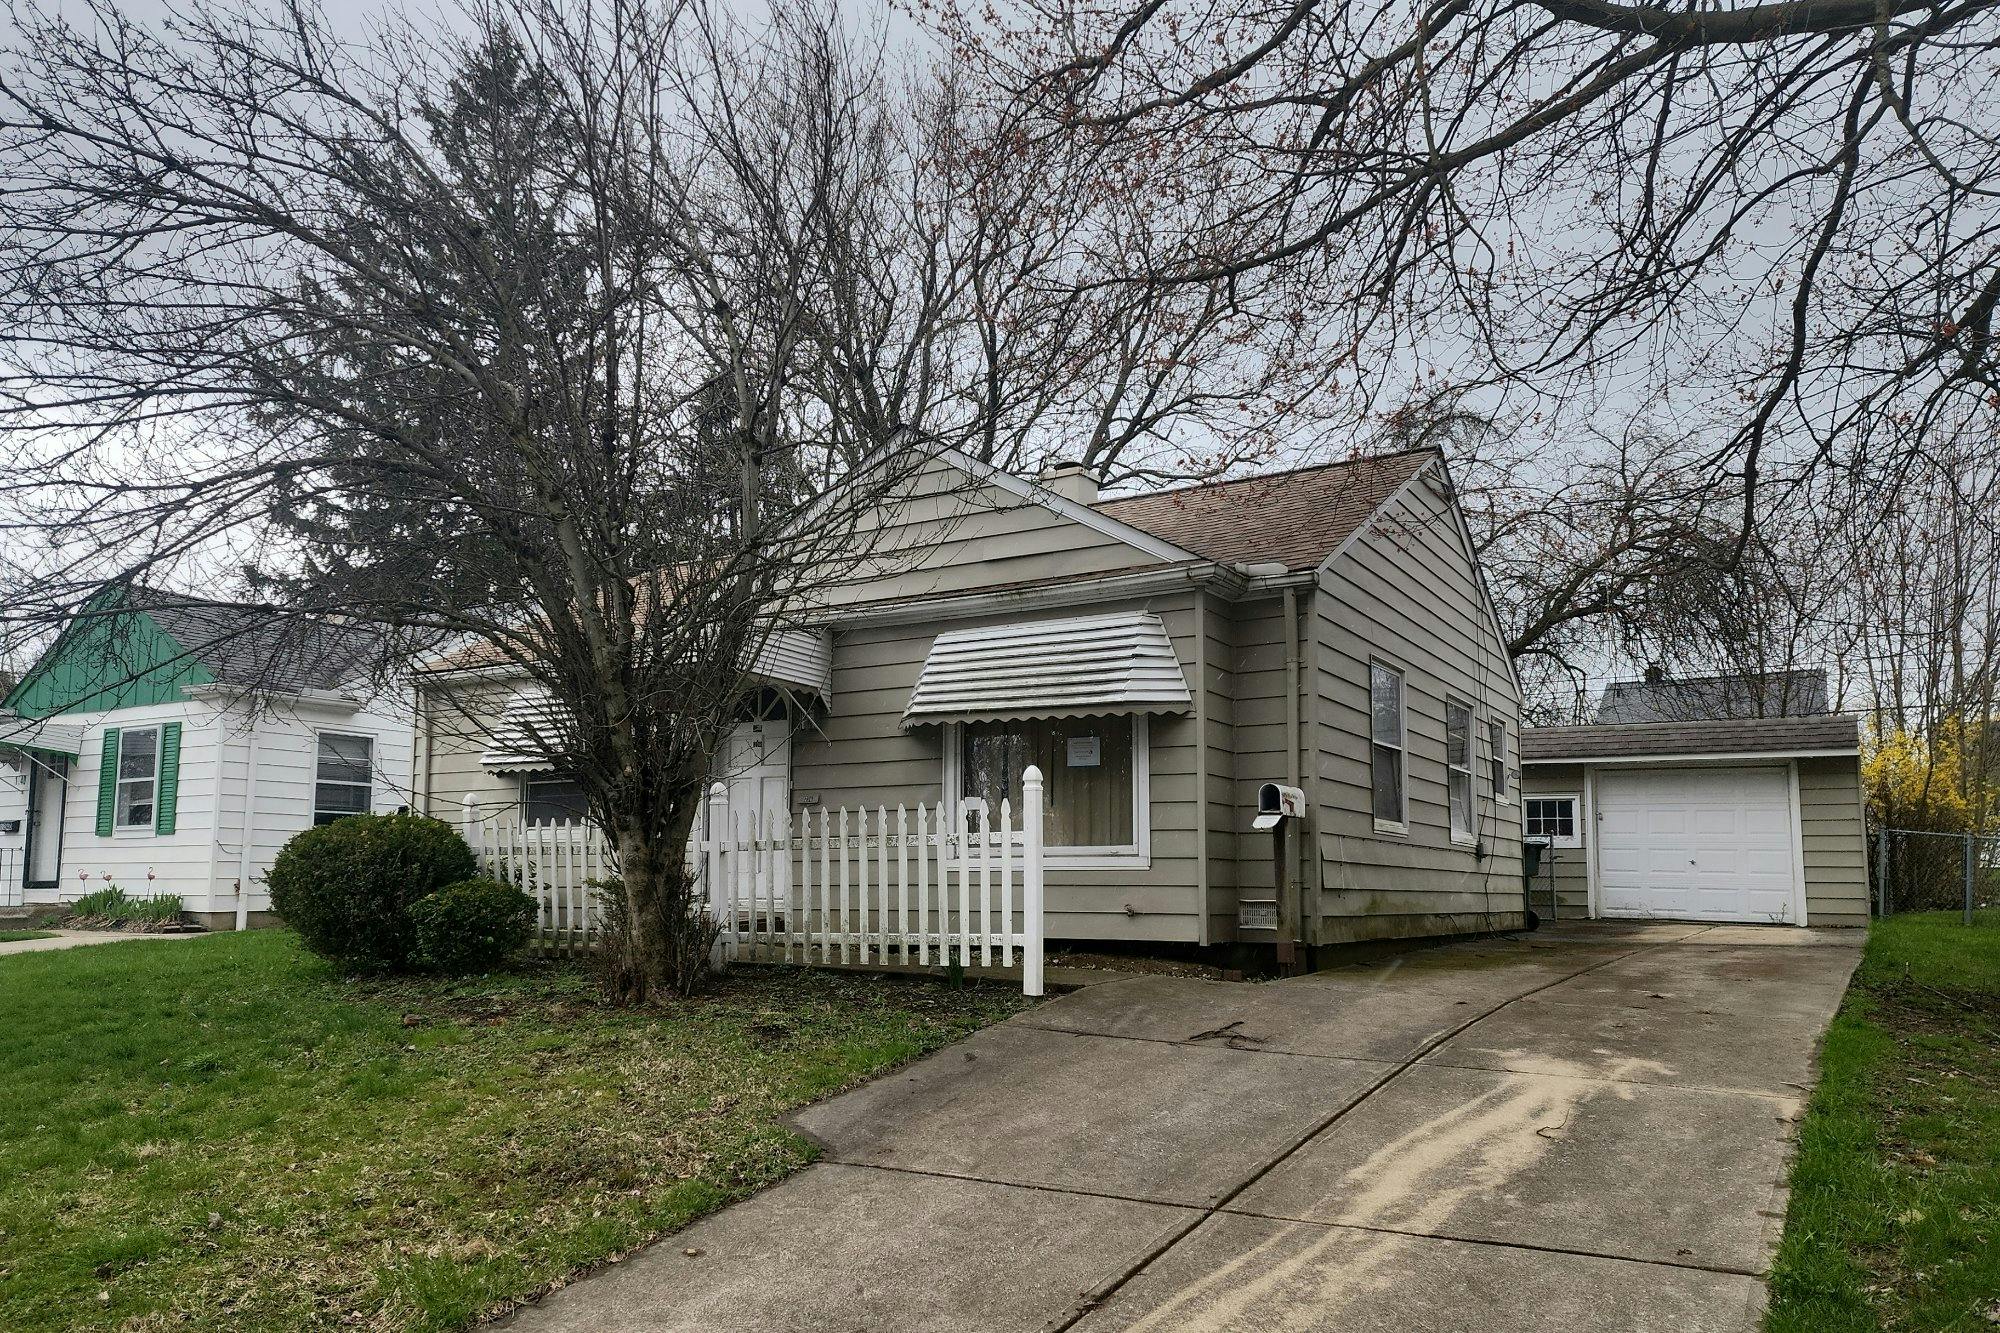 Orchard Heights Dr, Mayfield Heights, OH 44124 #1